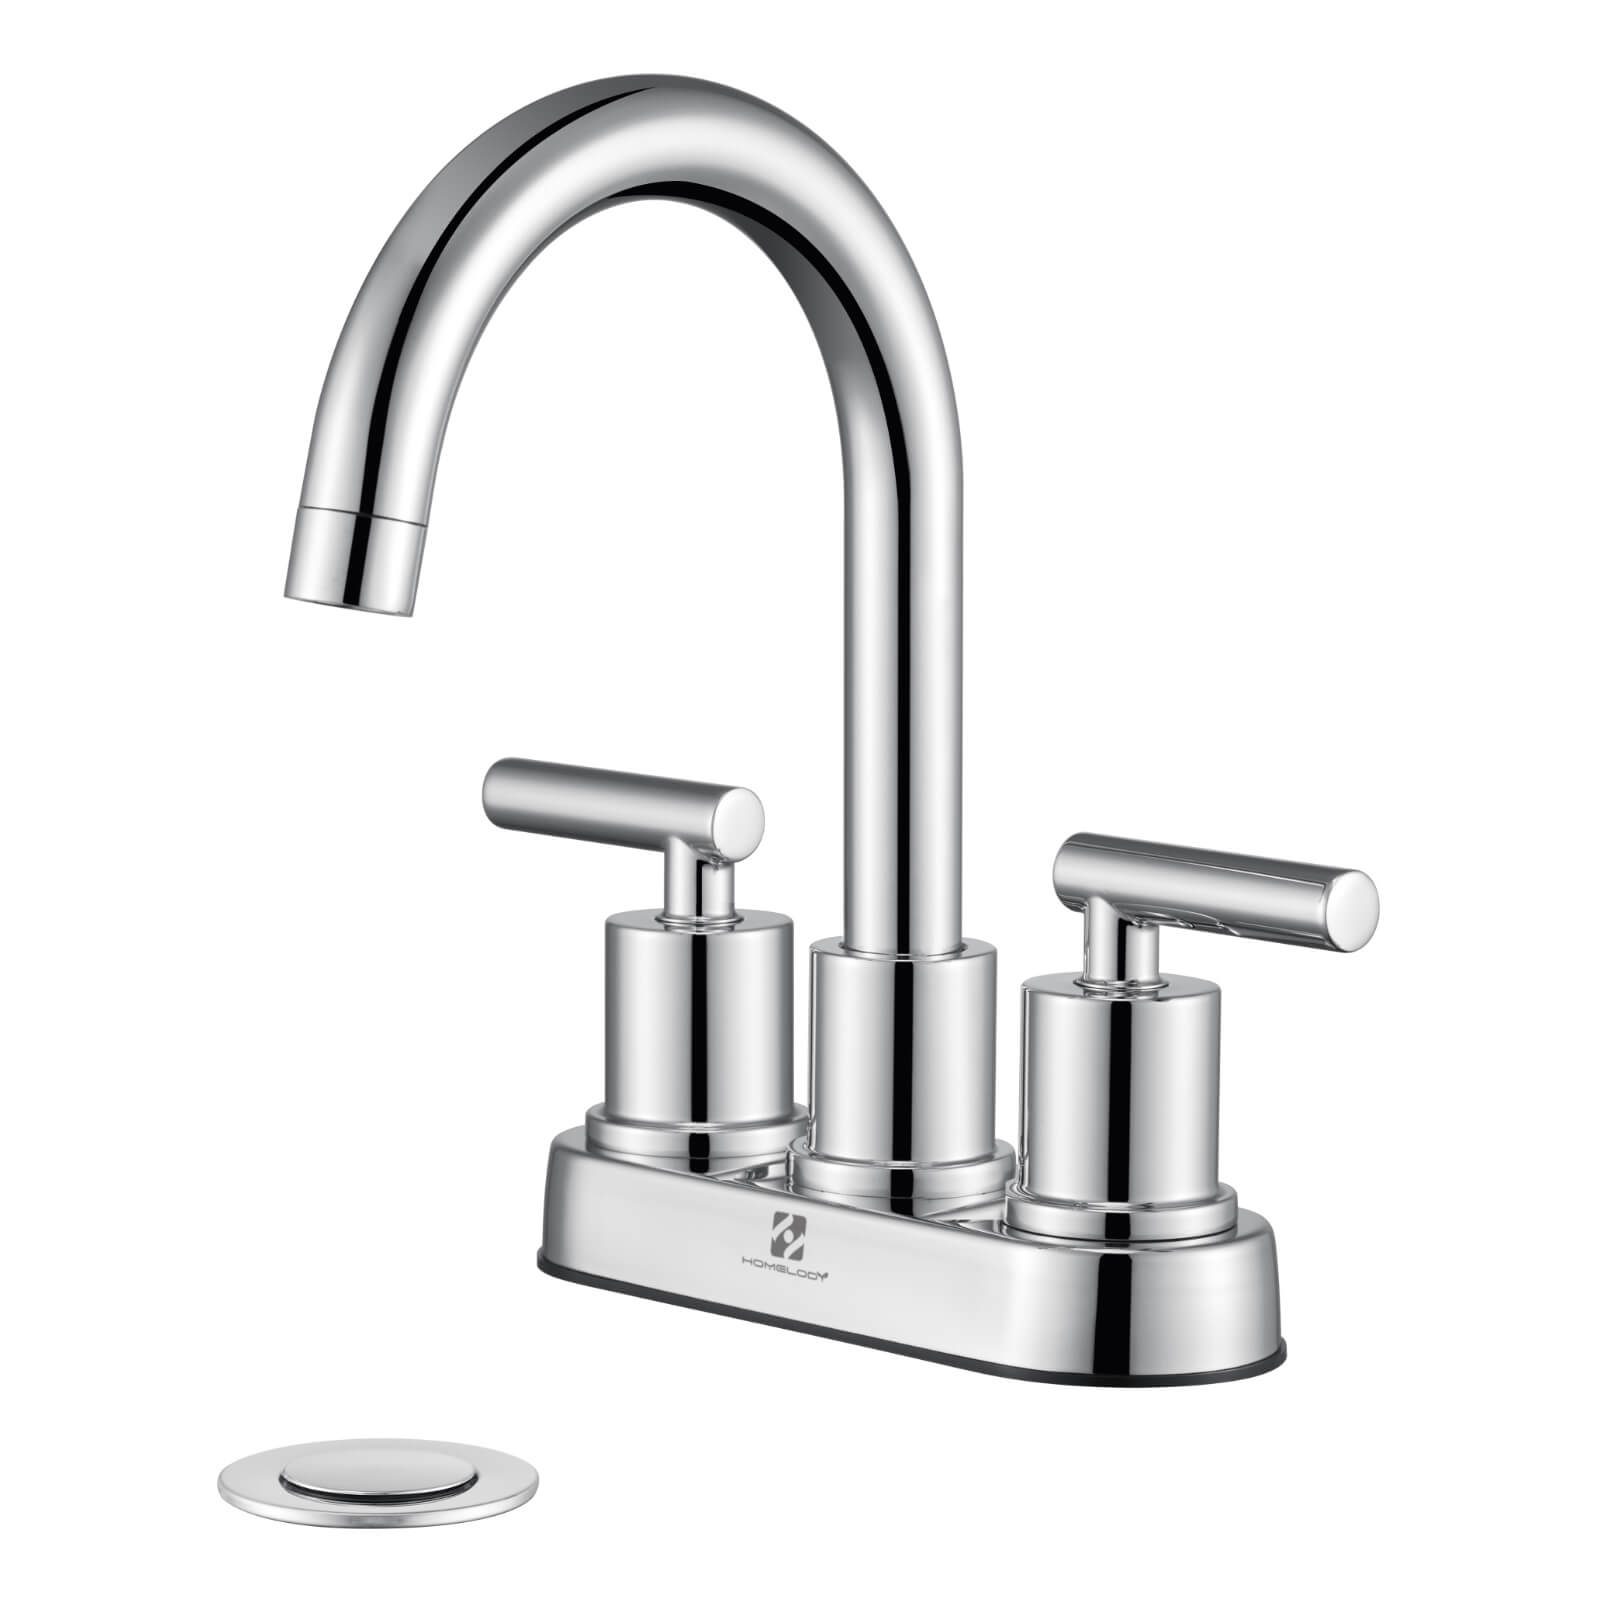 HOMELODY 2 Handles Bathroom Faucet with Pop-up Drain Assembly